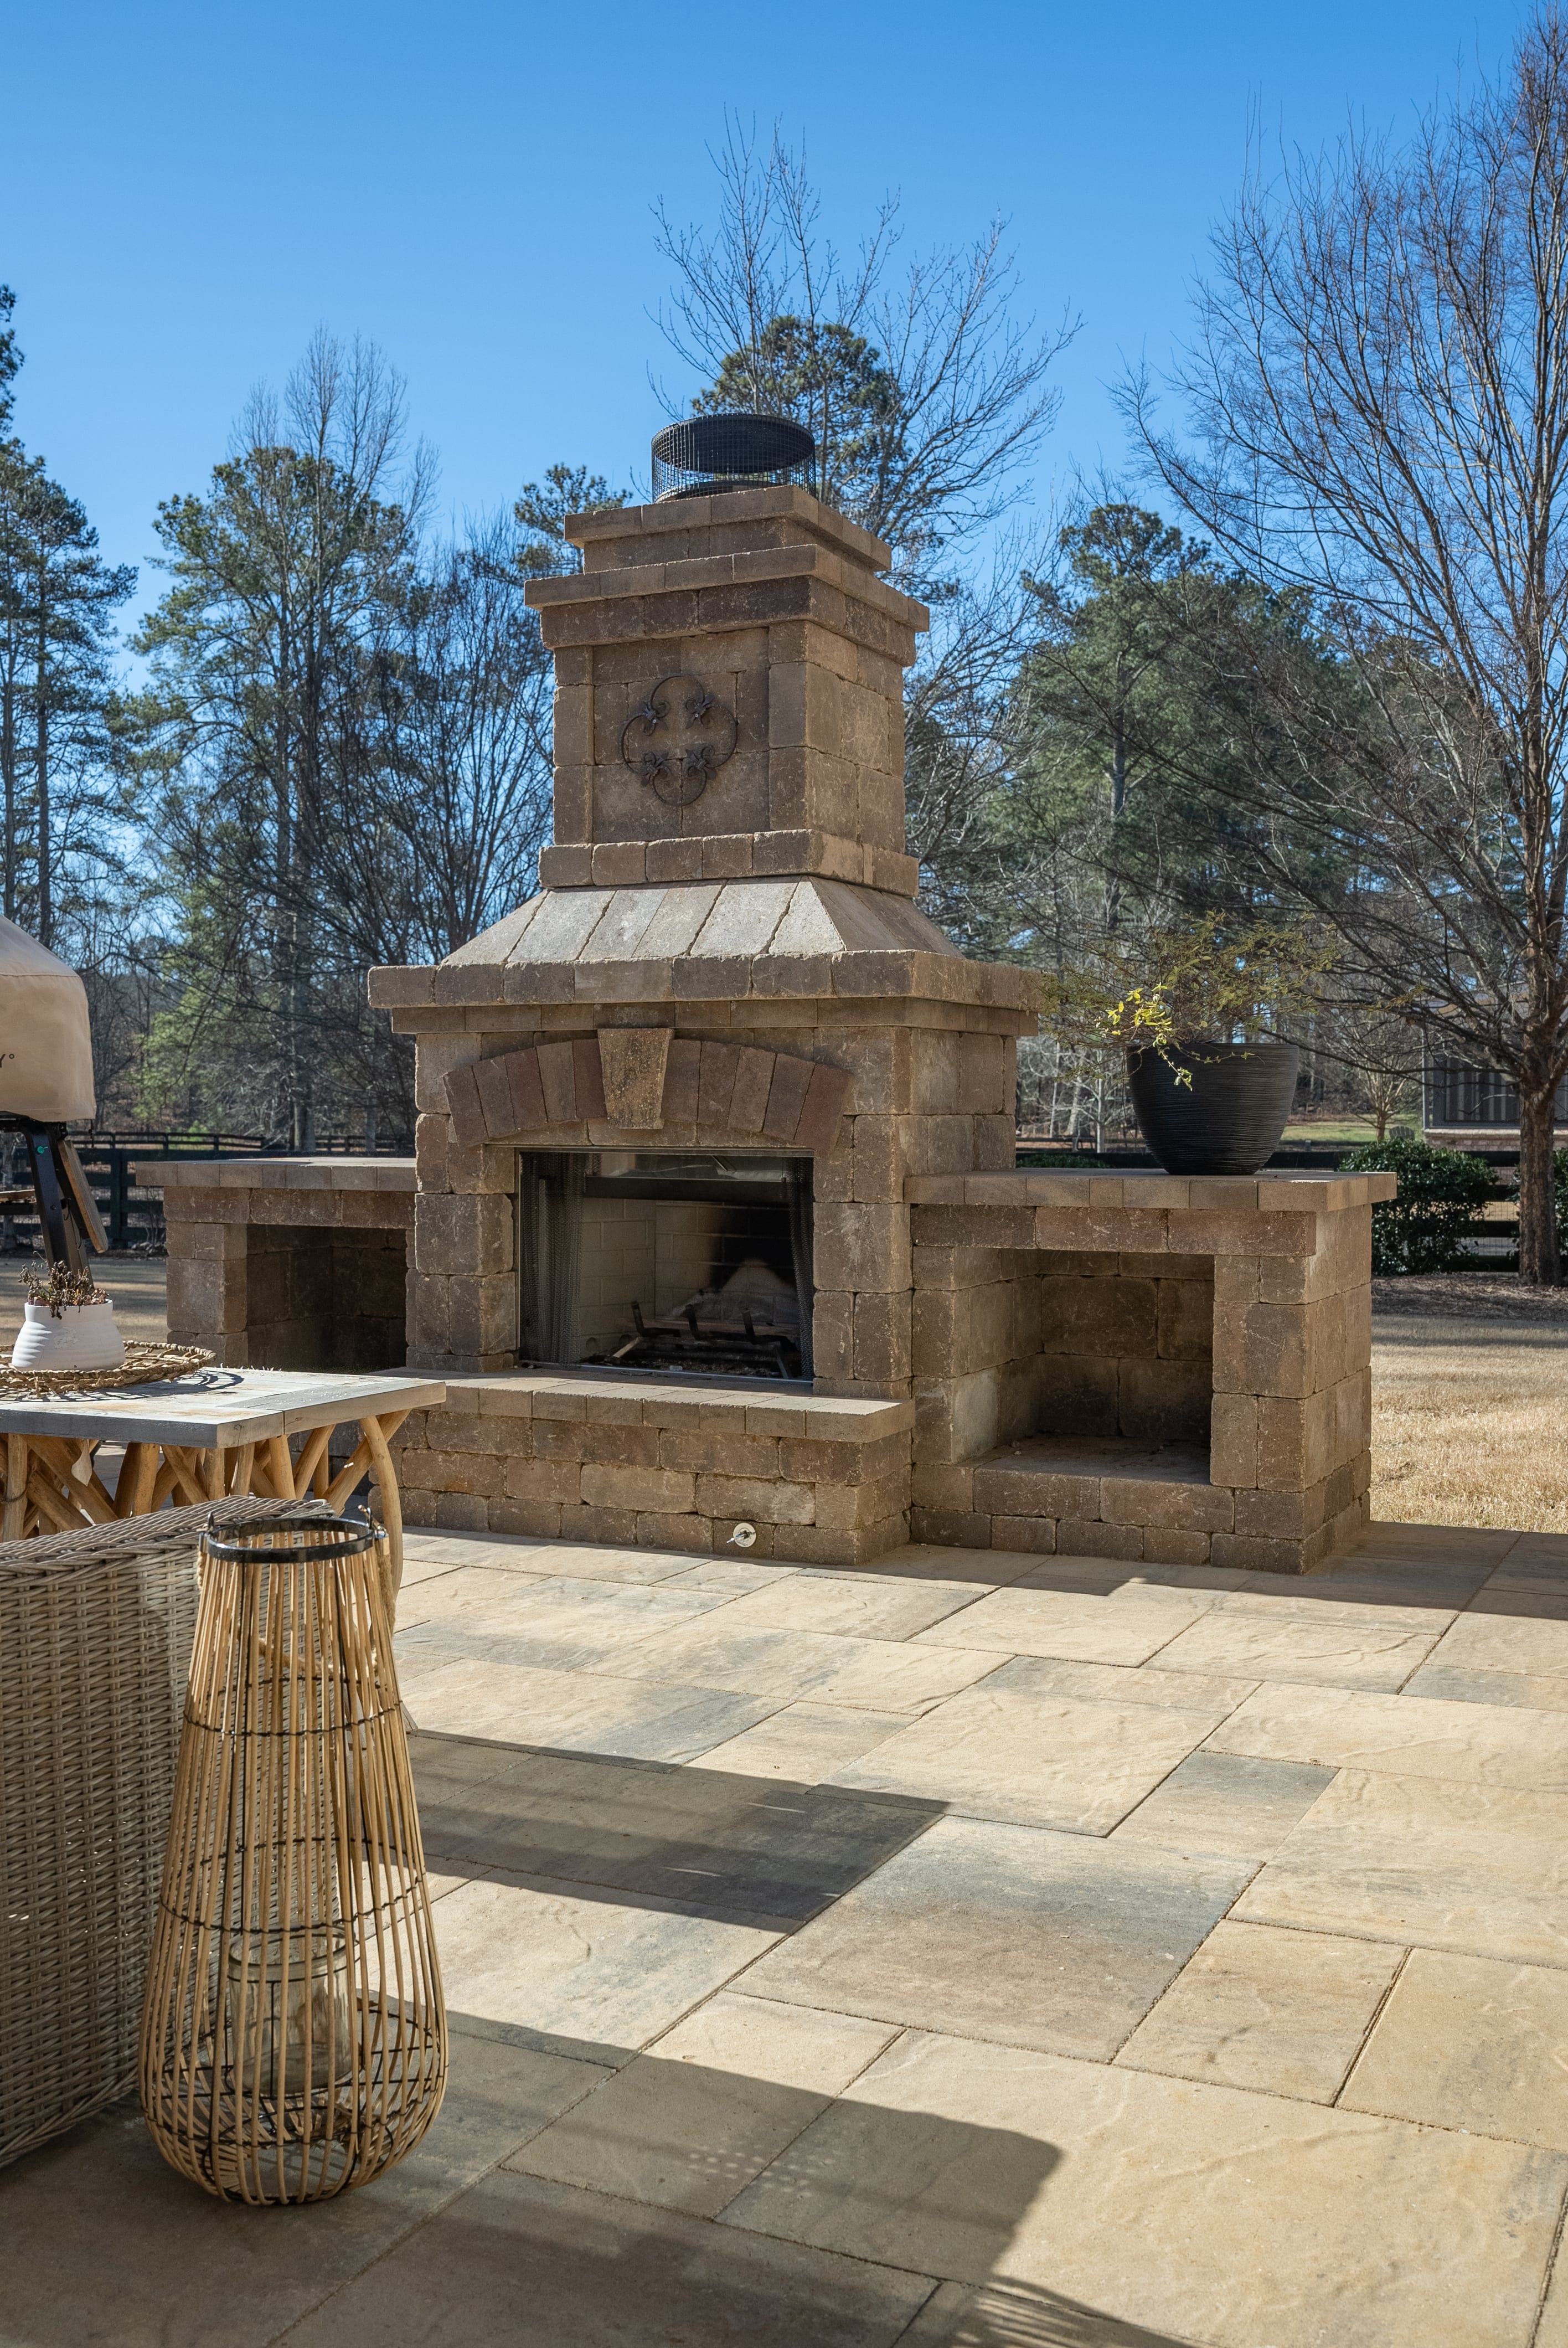 outdoor fire place area with a table in the bottom left corner